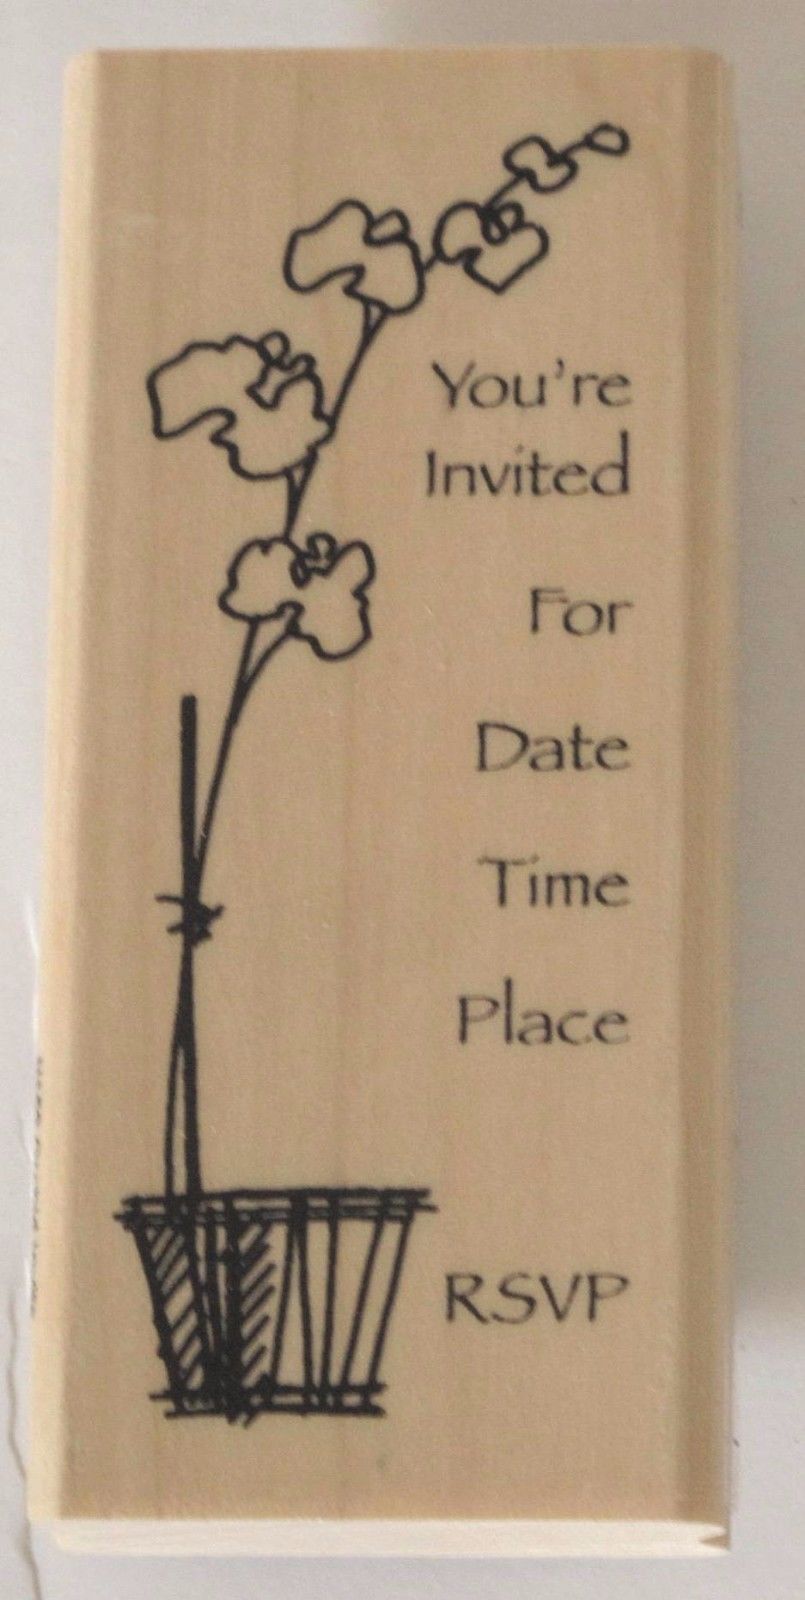 You're Invited RSVP Rubber Stamp Wood Mounted by Stampendous - $8.42